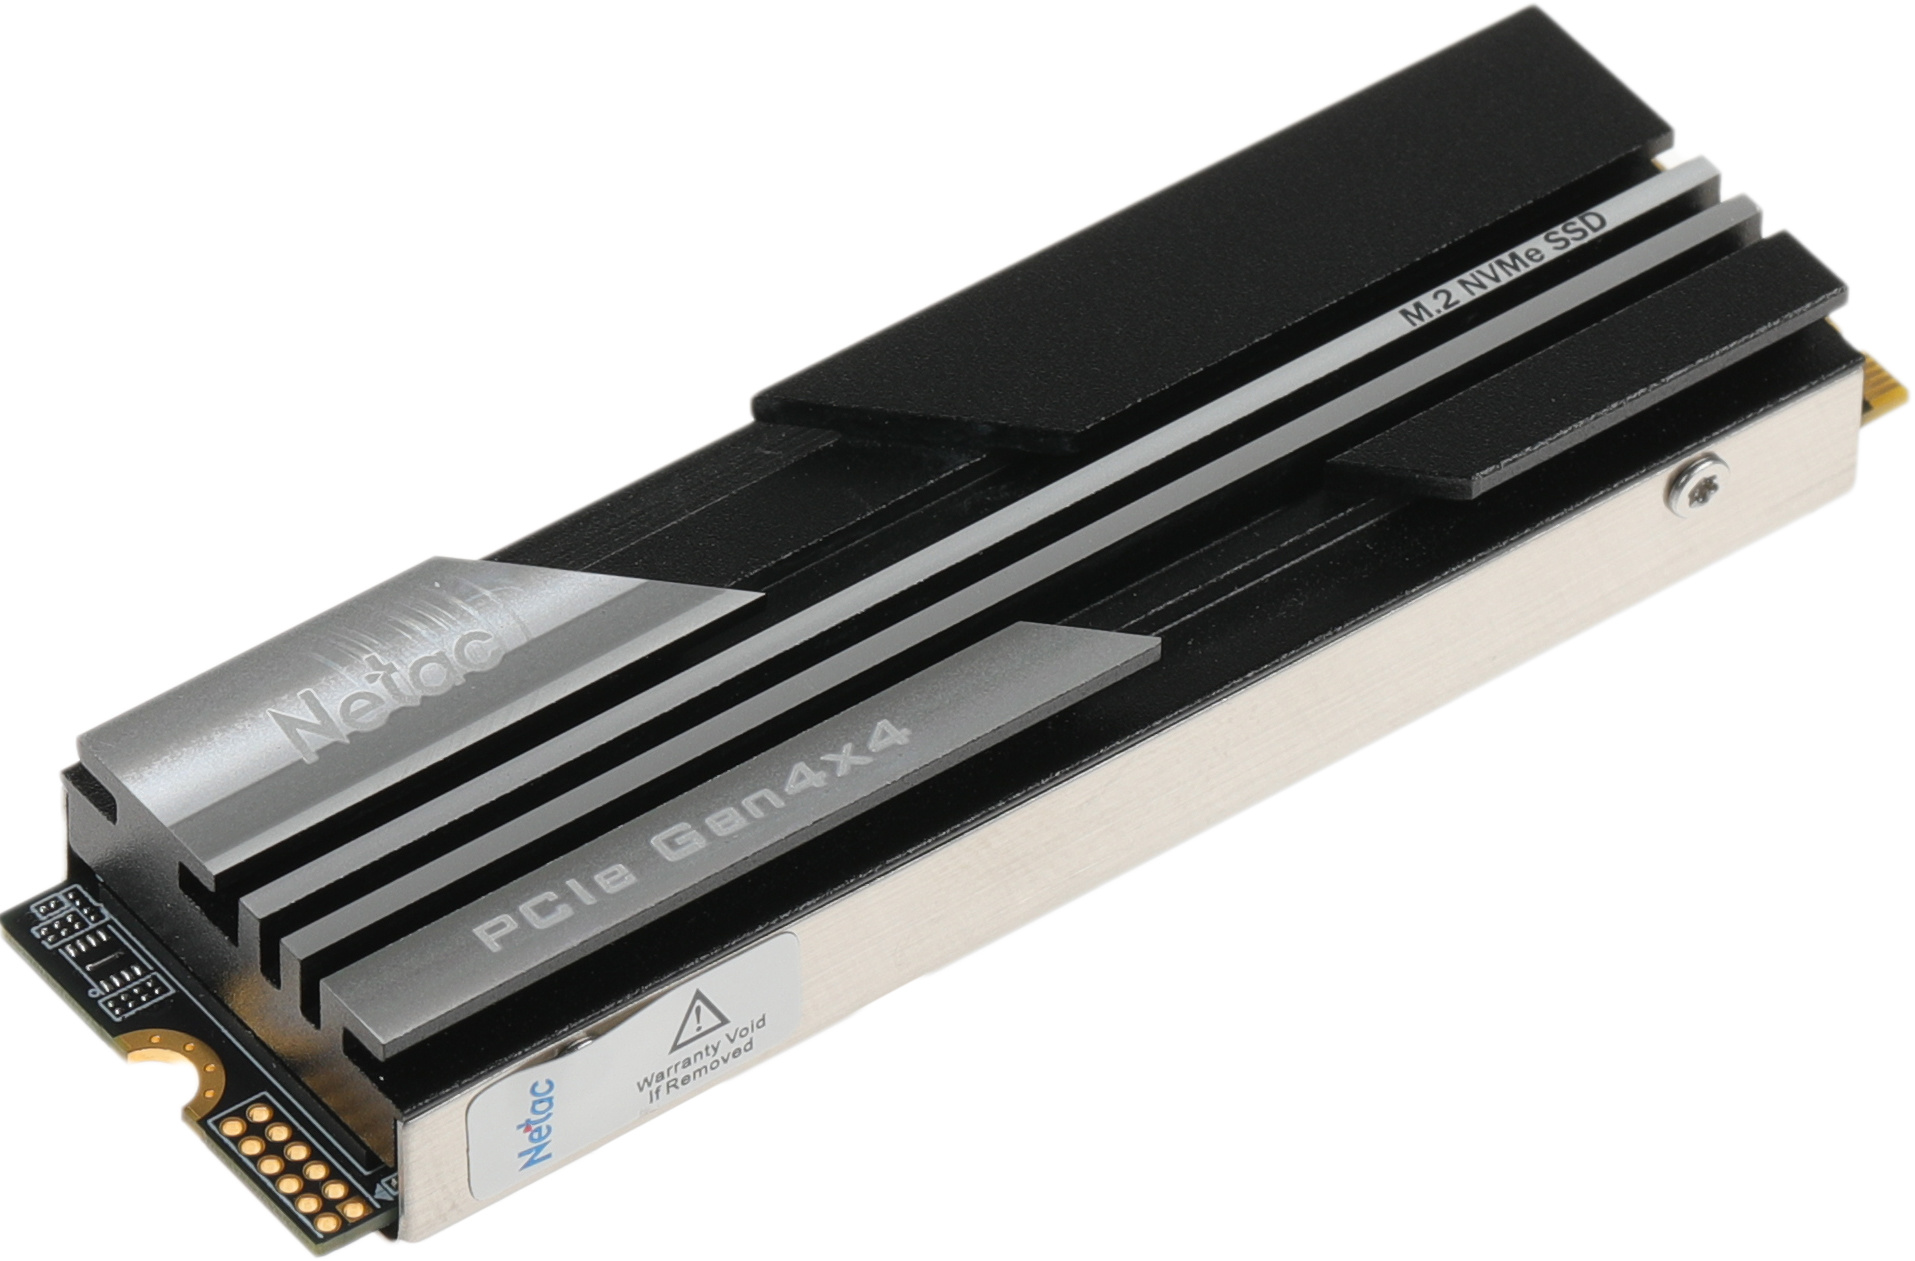   Netac NV5000 PCIe 4 x4 M,2 2280 NVMe 3D NAND SSD 2TB, R/W up to 5000/4400MB/s, with heat sink